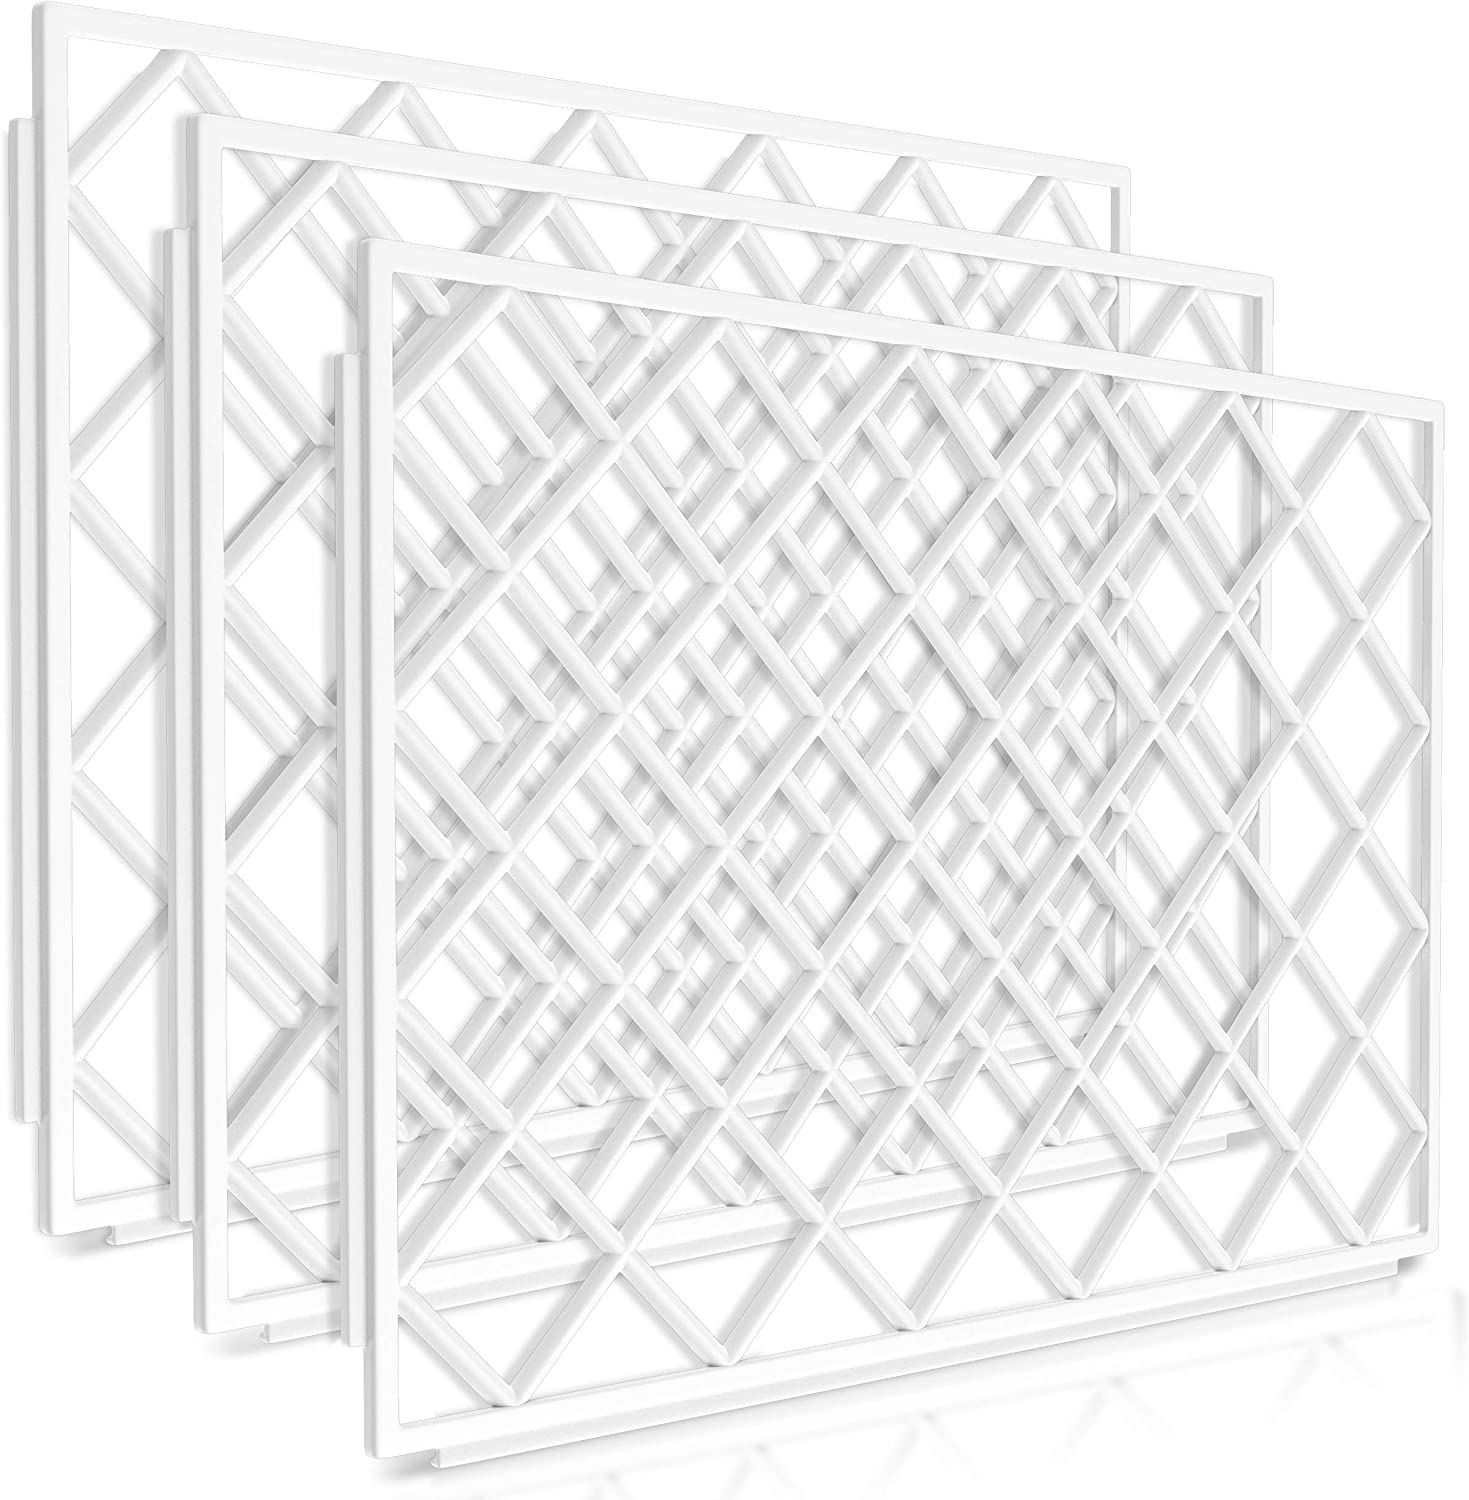 Esatto Bar Products 10 Pieces Interlocking Shelf Mats 8 x 12 Inches, Clear